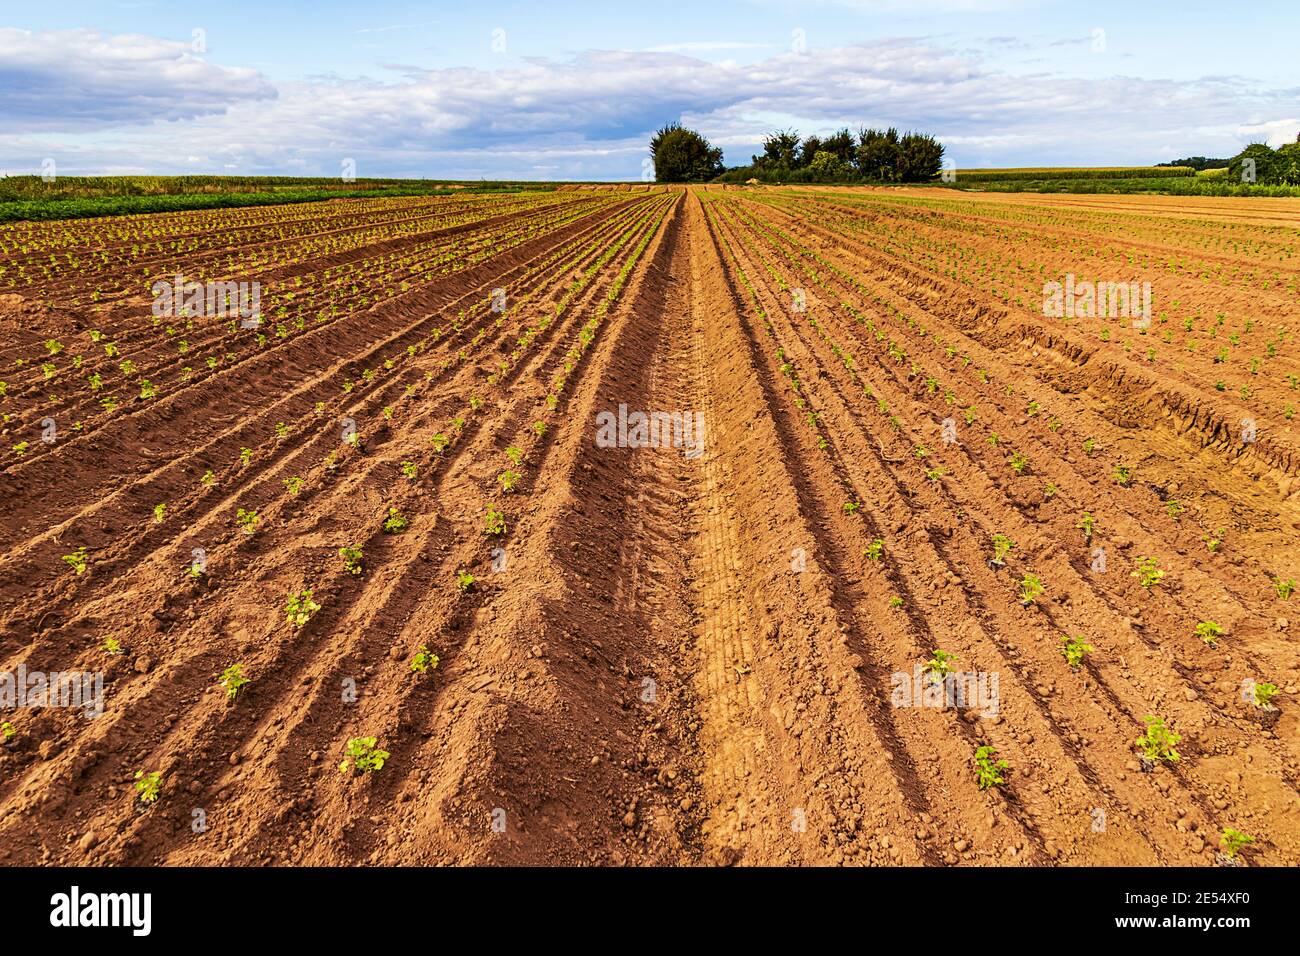 Huge field with long rows of tiny young parsley plants. Organic farming in Hesse, Germany Stock Photo